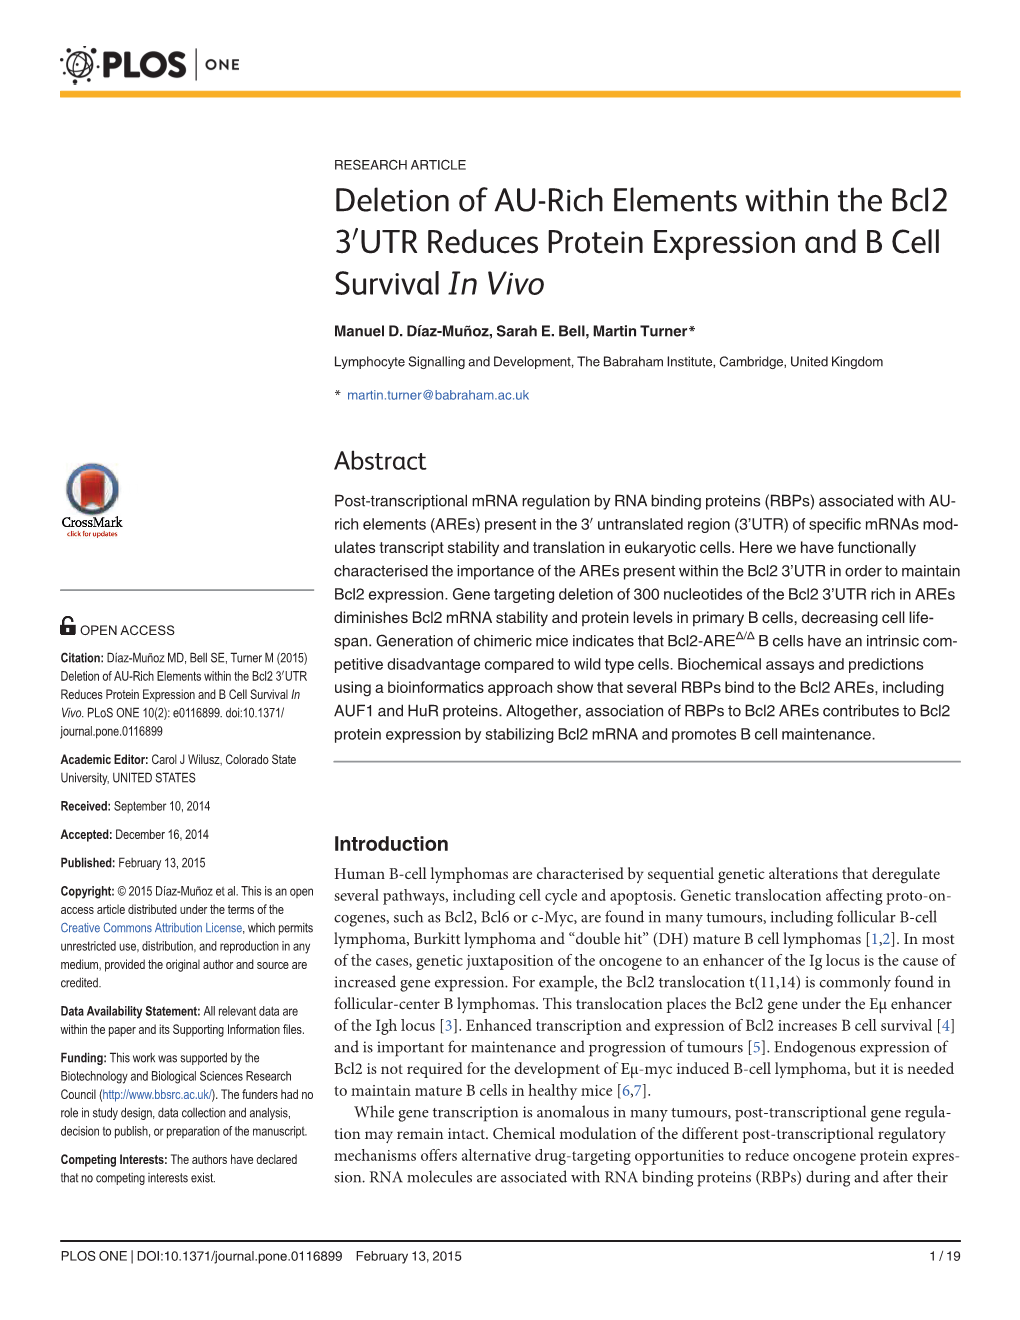 Deletion of AU-Rich Elements Within the Bcl2 30UTR Reduces Protein Expression and B Cell Survival in Vivo